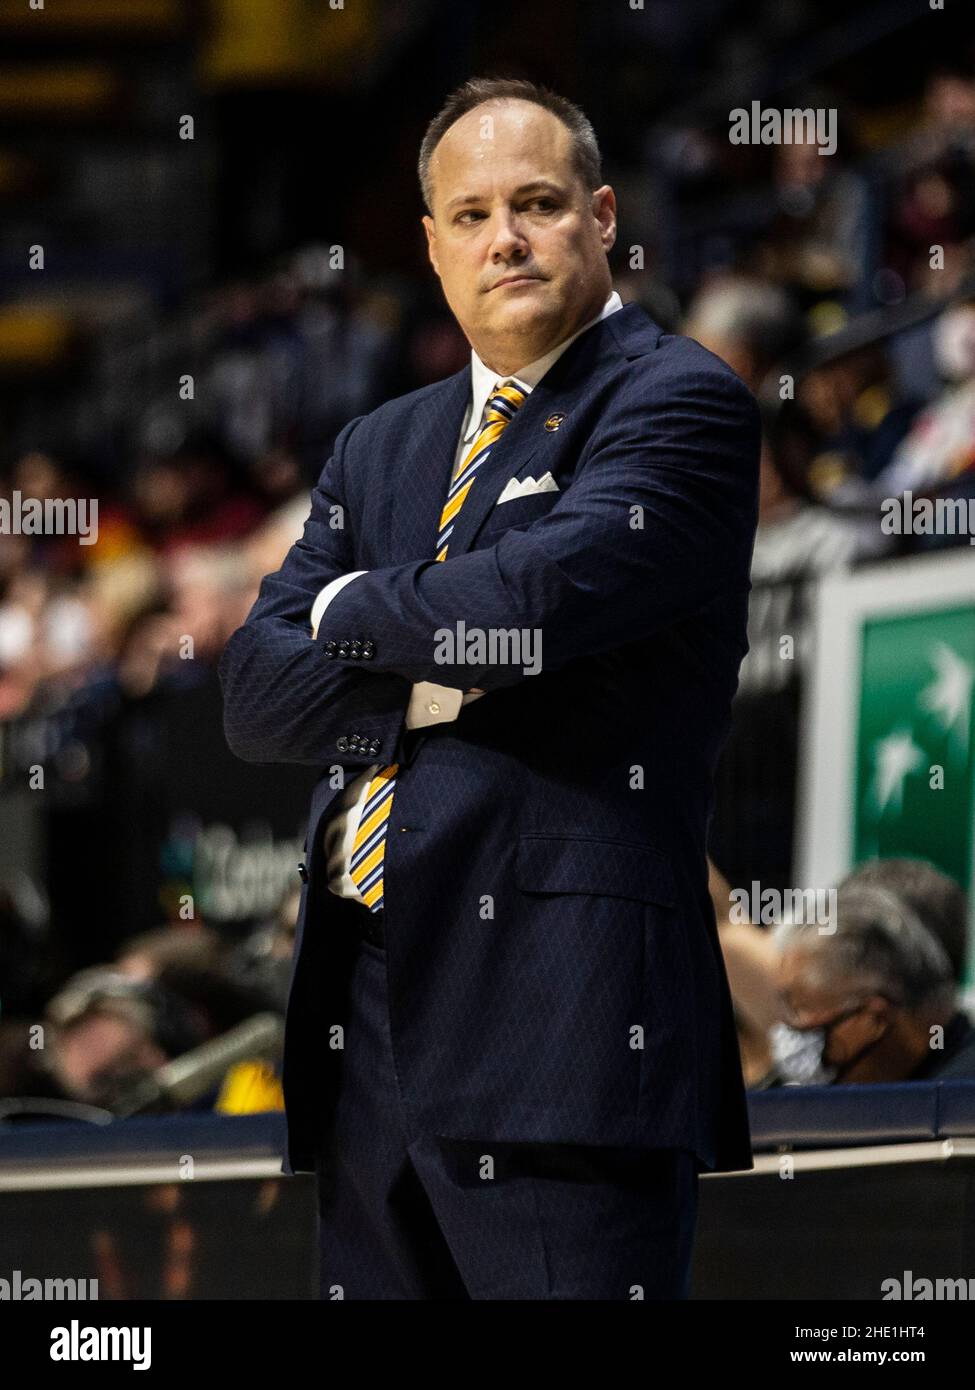 Hass Pavilion. 06th Jan, 2022. CA U.S.A. California head coach Mark Fox on the court during the NCAA MenÕs Basketball game between USC Trojans and the California Golden Bears. USC won 77-63 at Hass Pavilion. Thurman James/CSM/Alamy Live News Stock Photo